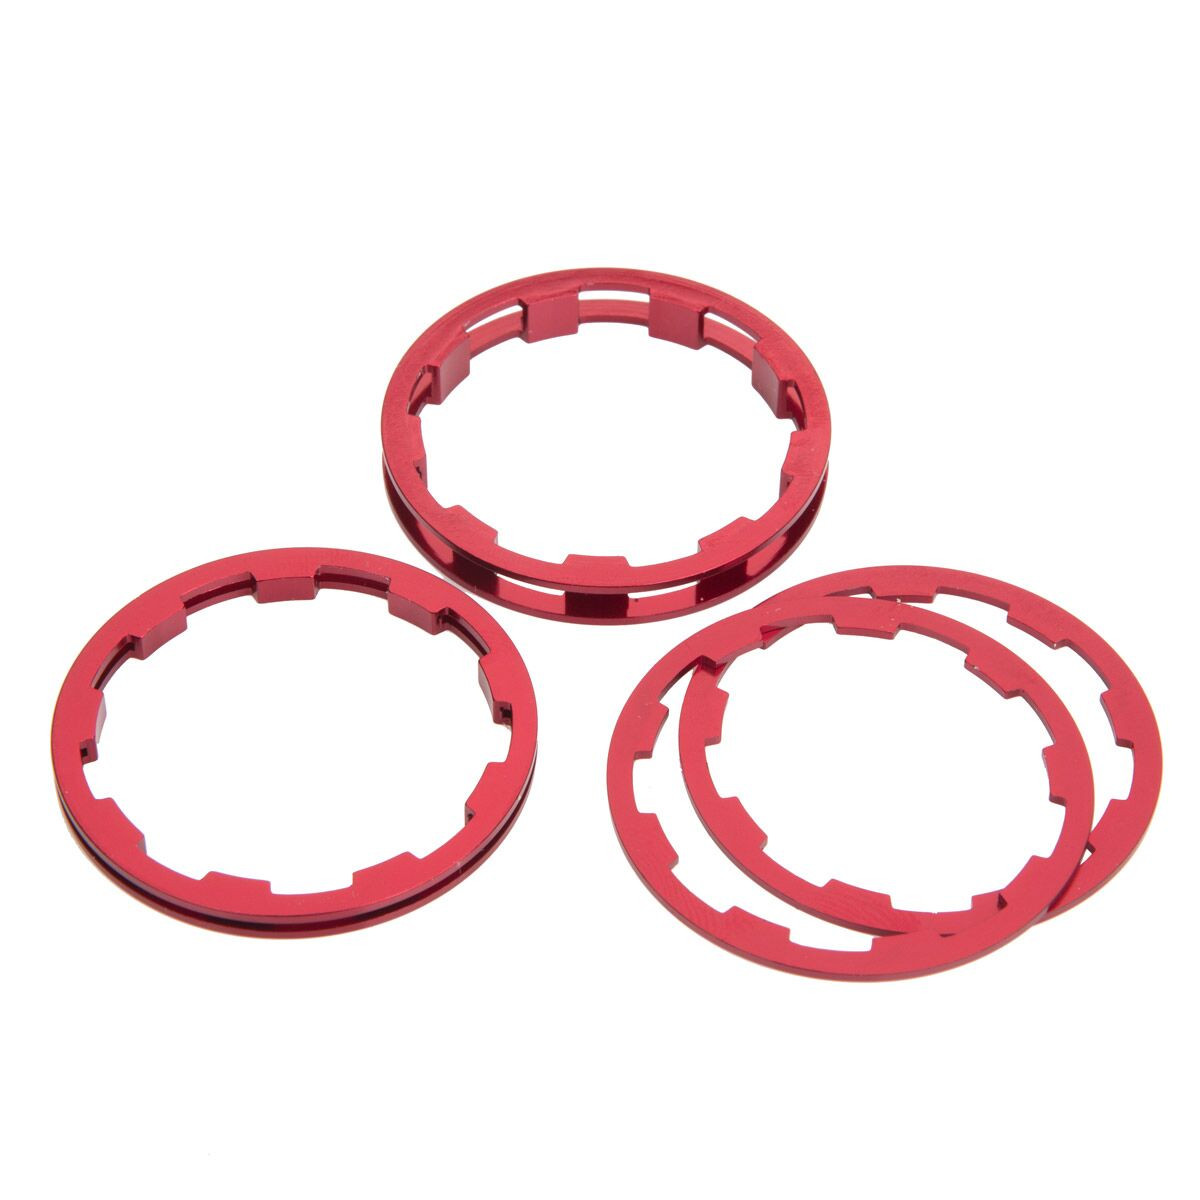 BOXCOMPONENTS One Cassette Spacer Kits